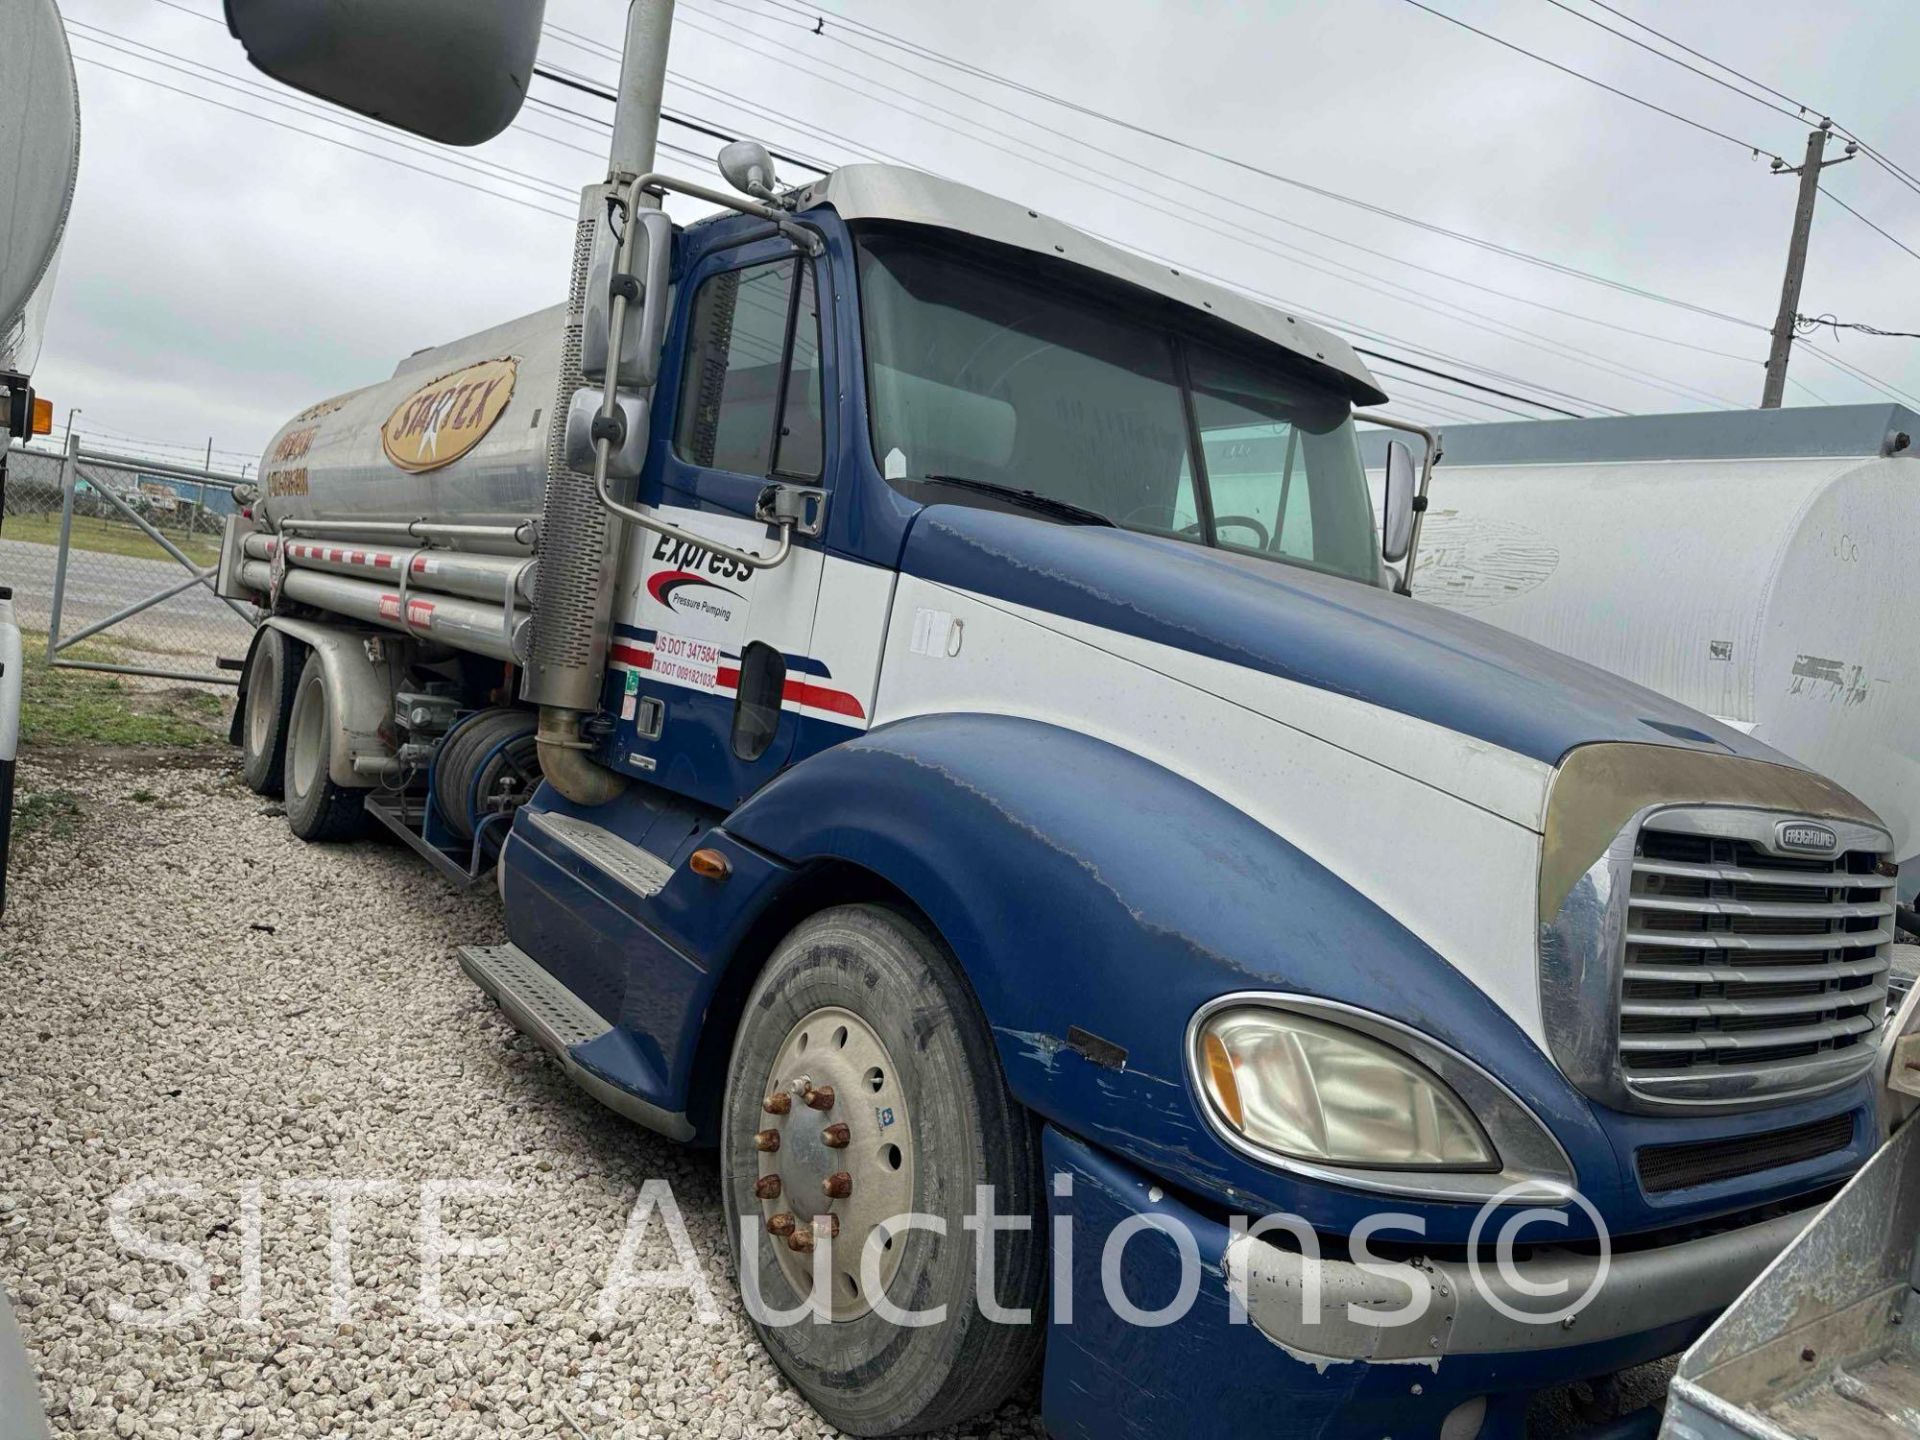 2004 Freightliner Columbia T/A Fuel Truck - Image 2 of 4